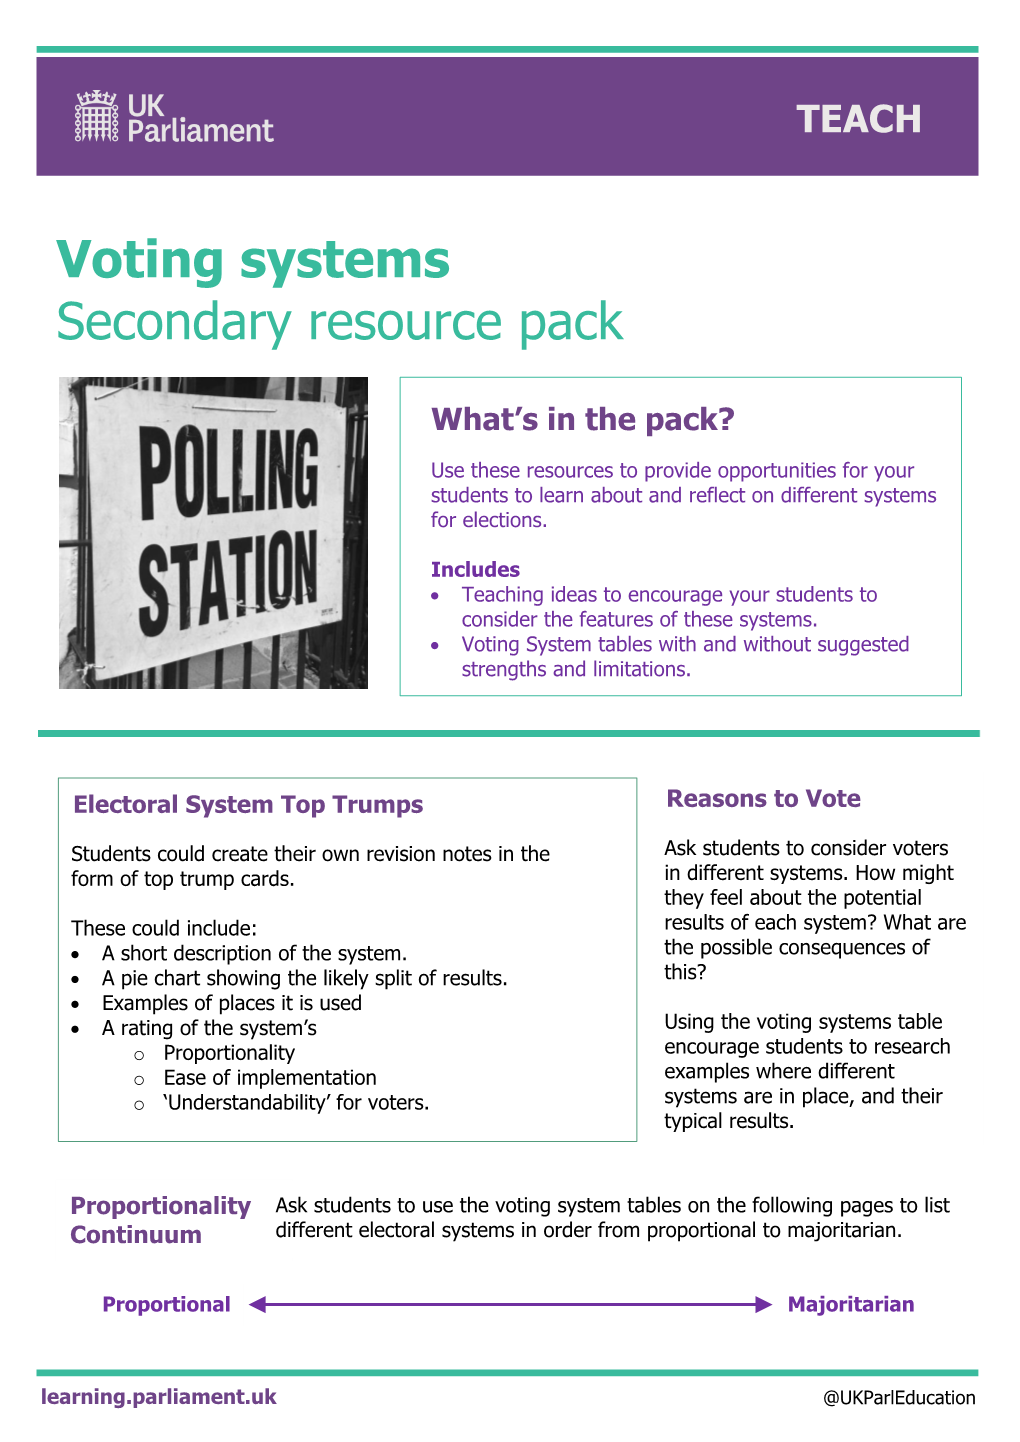 Voting Systems Secondary Resource Pack